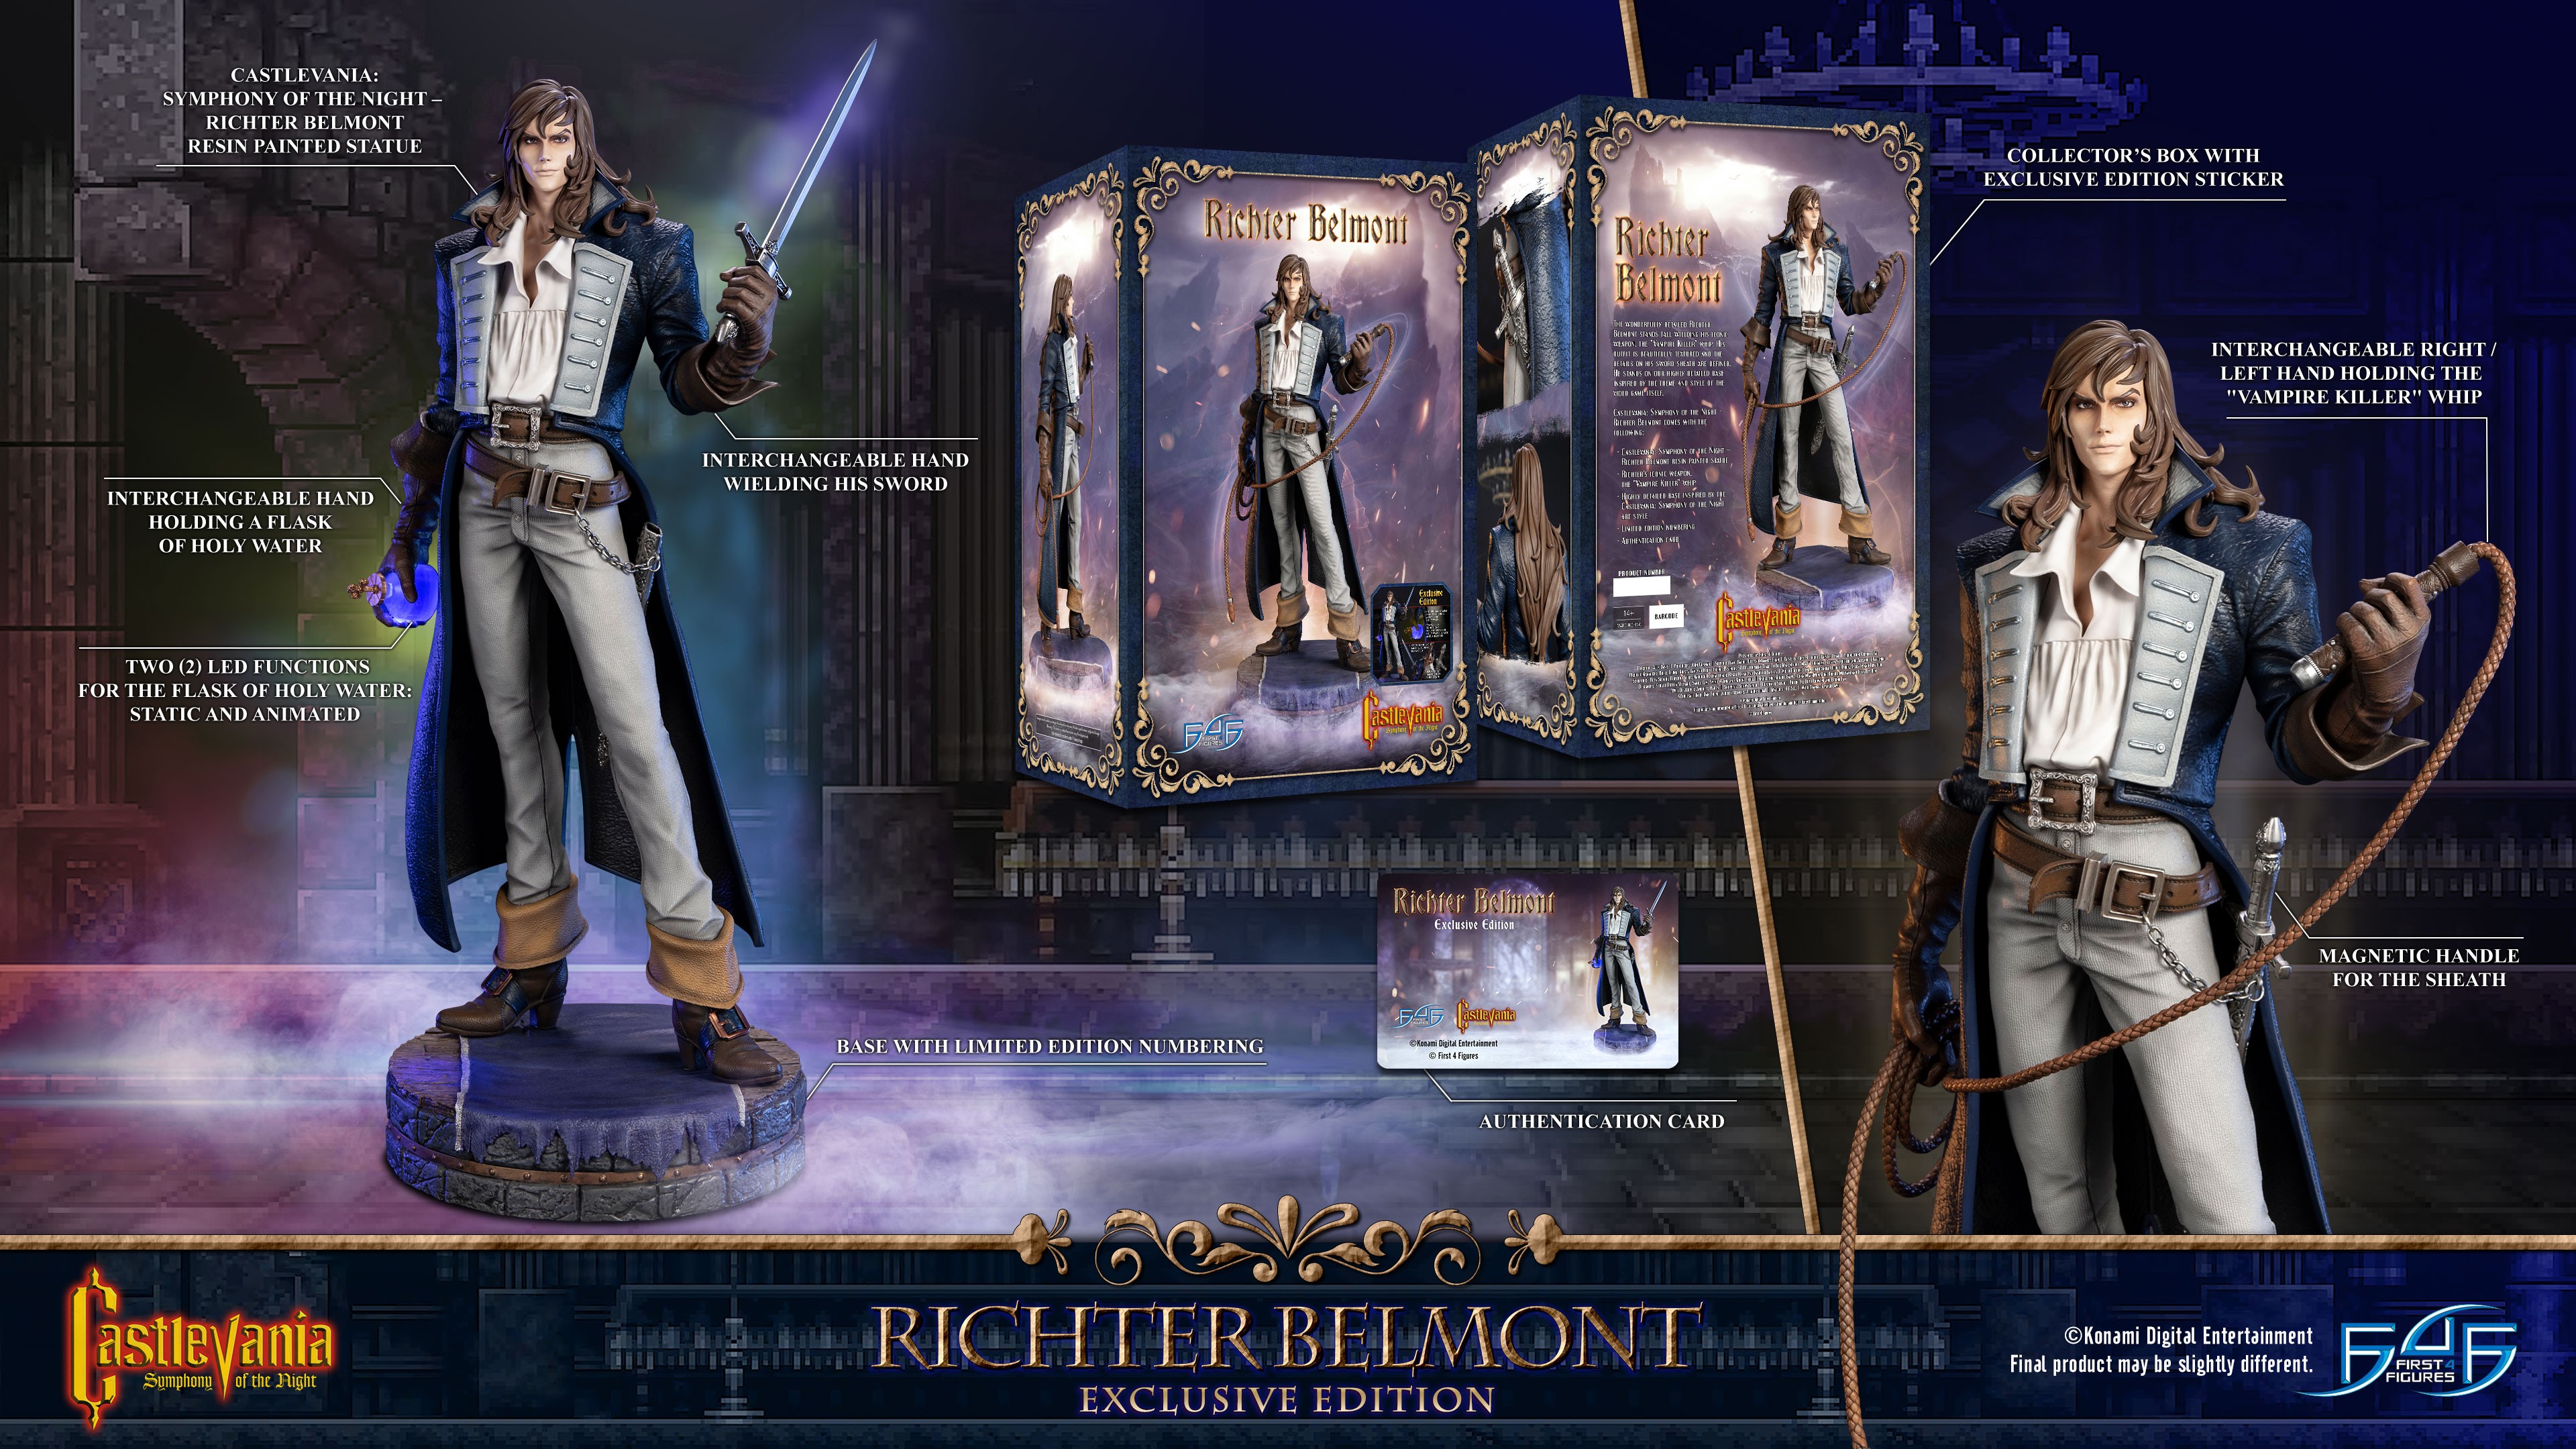 Castlevania: Symphony of the Night - Richter Belmont (Exclusive Edition)